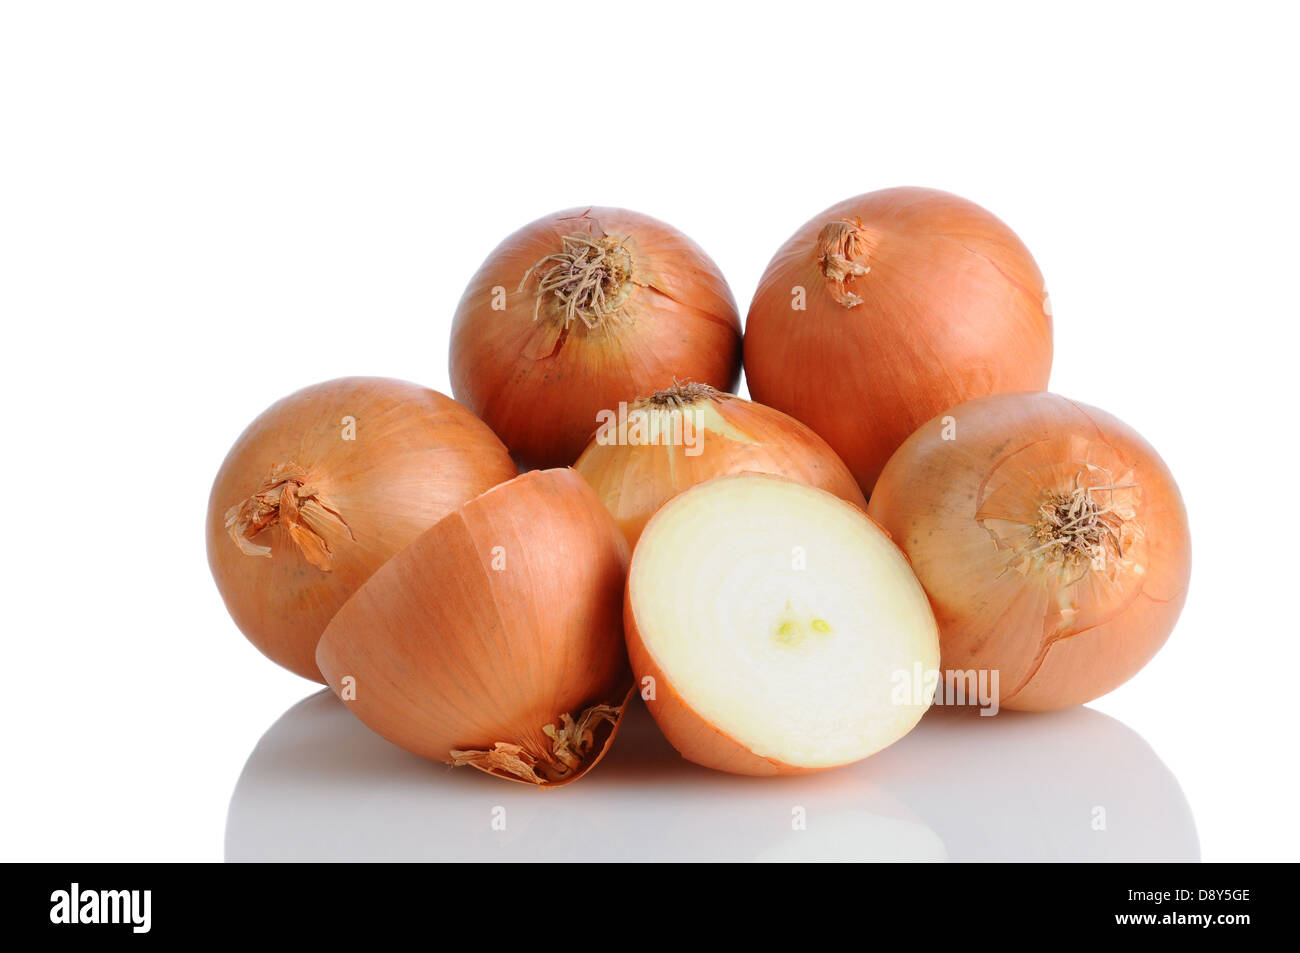 Closeup of a pile of yellow onions on a white surface with reflection. One onion is cut in half, horizontal format. Stock Photo